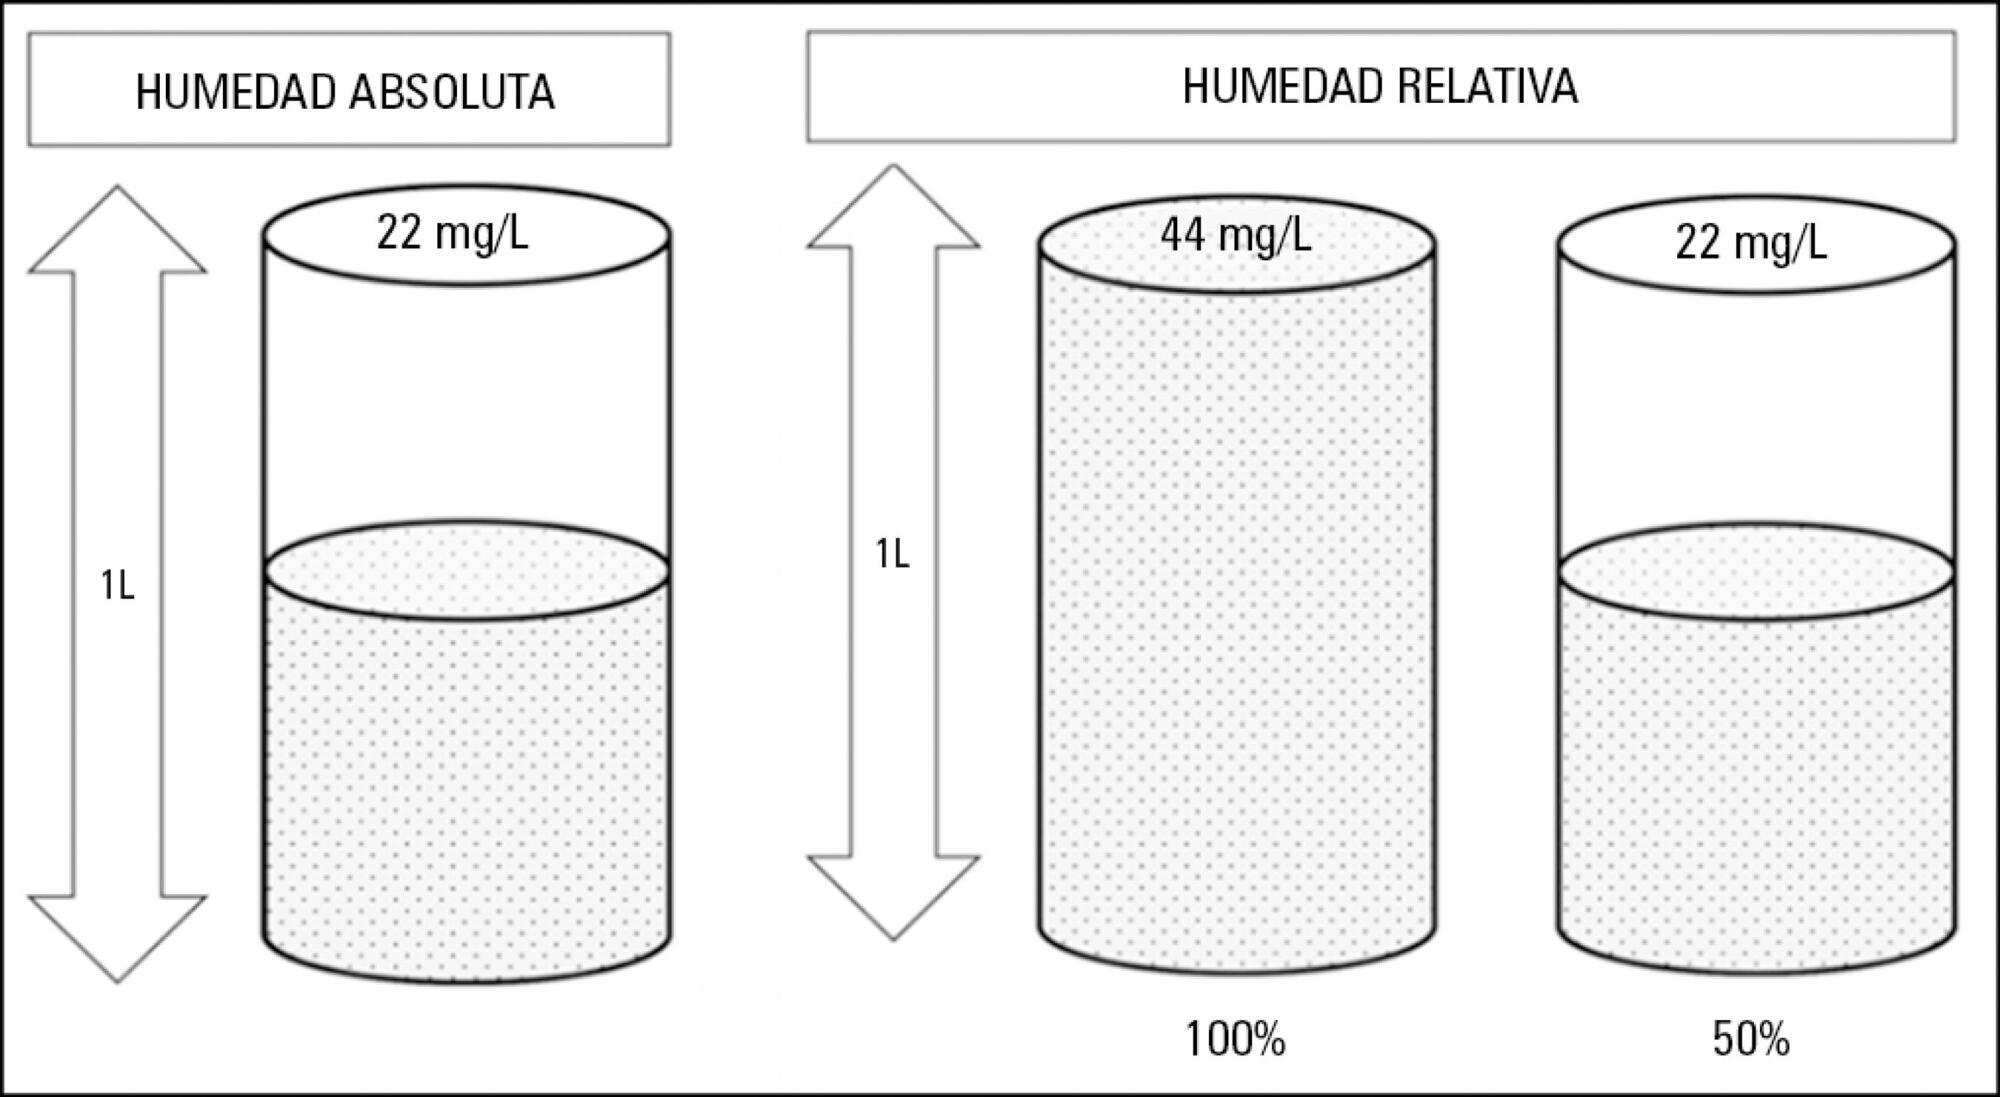 Humidification and heating of inhaled gas in patients with artificial airway. A narrative review